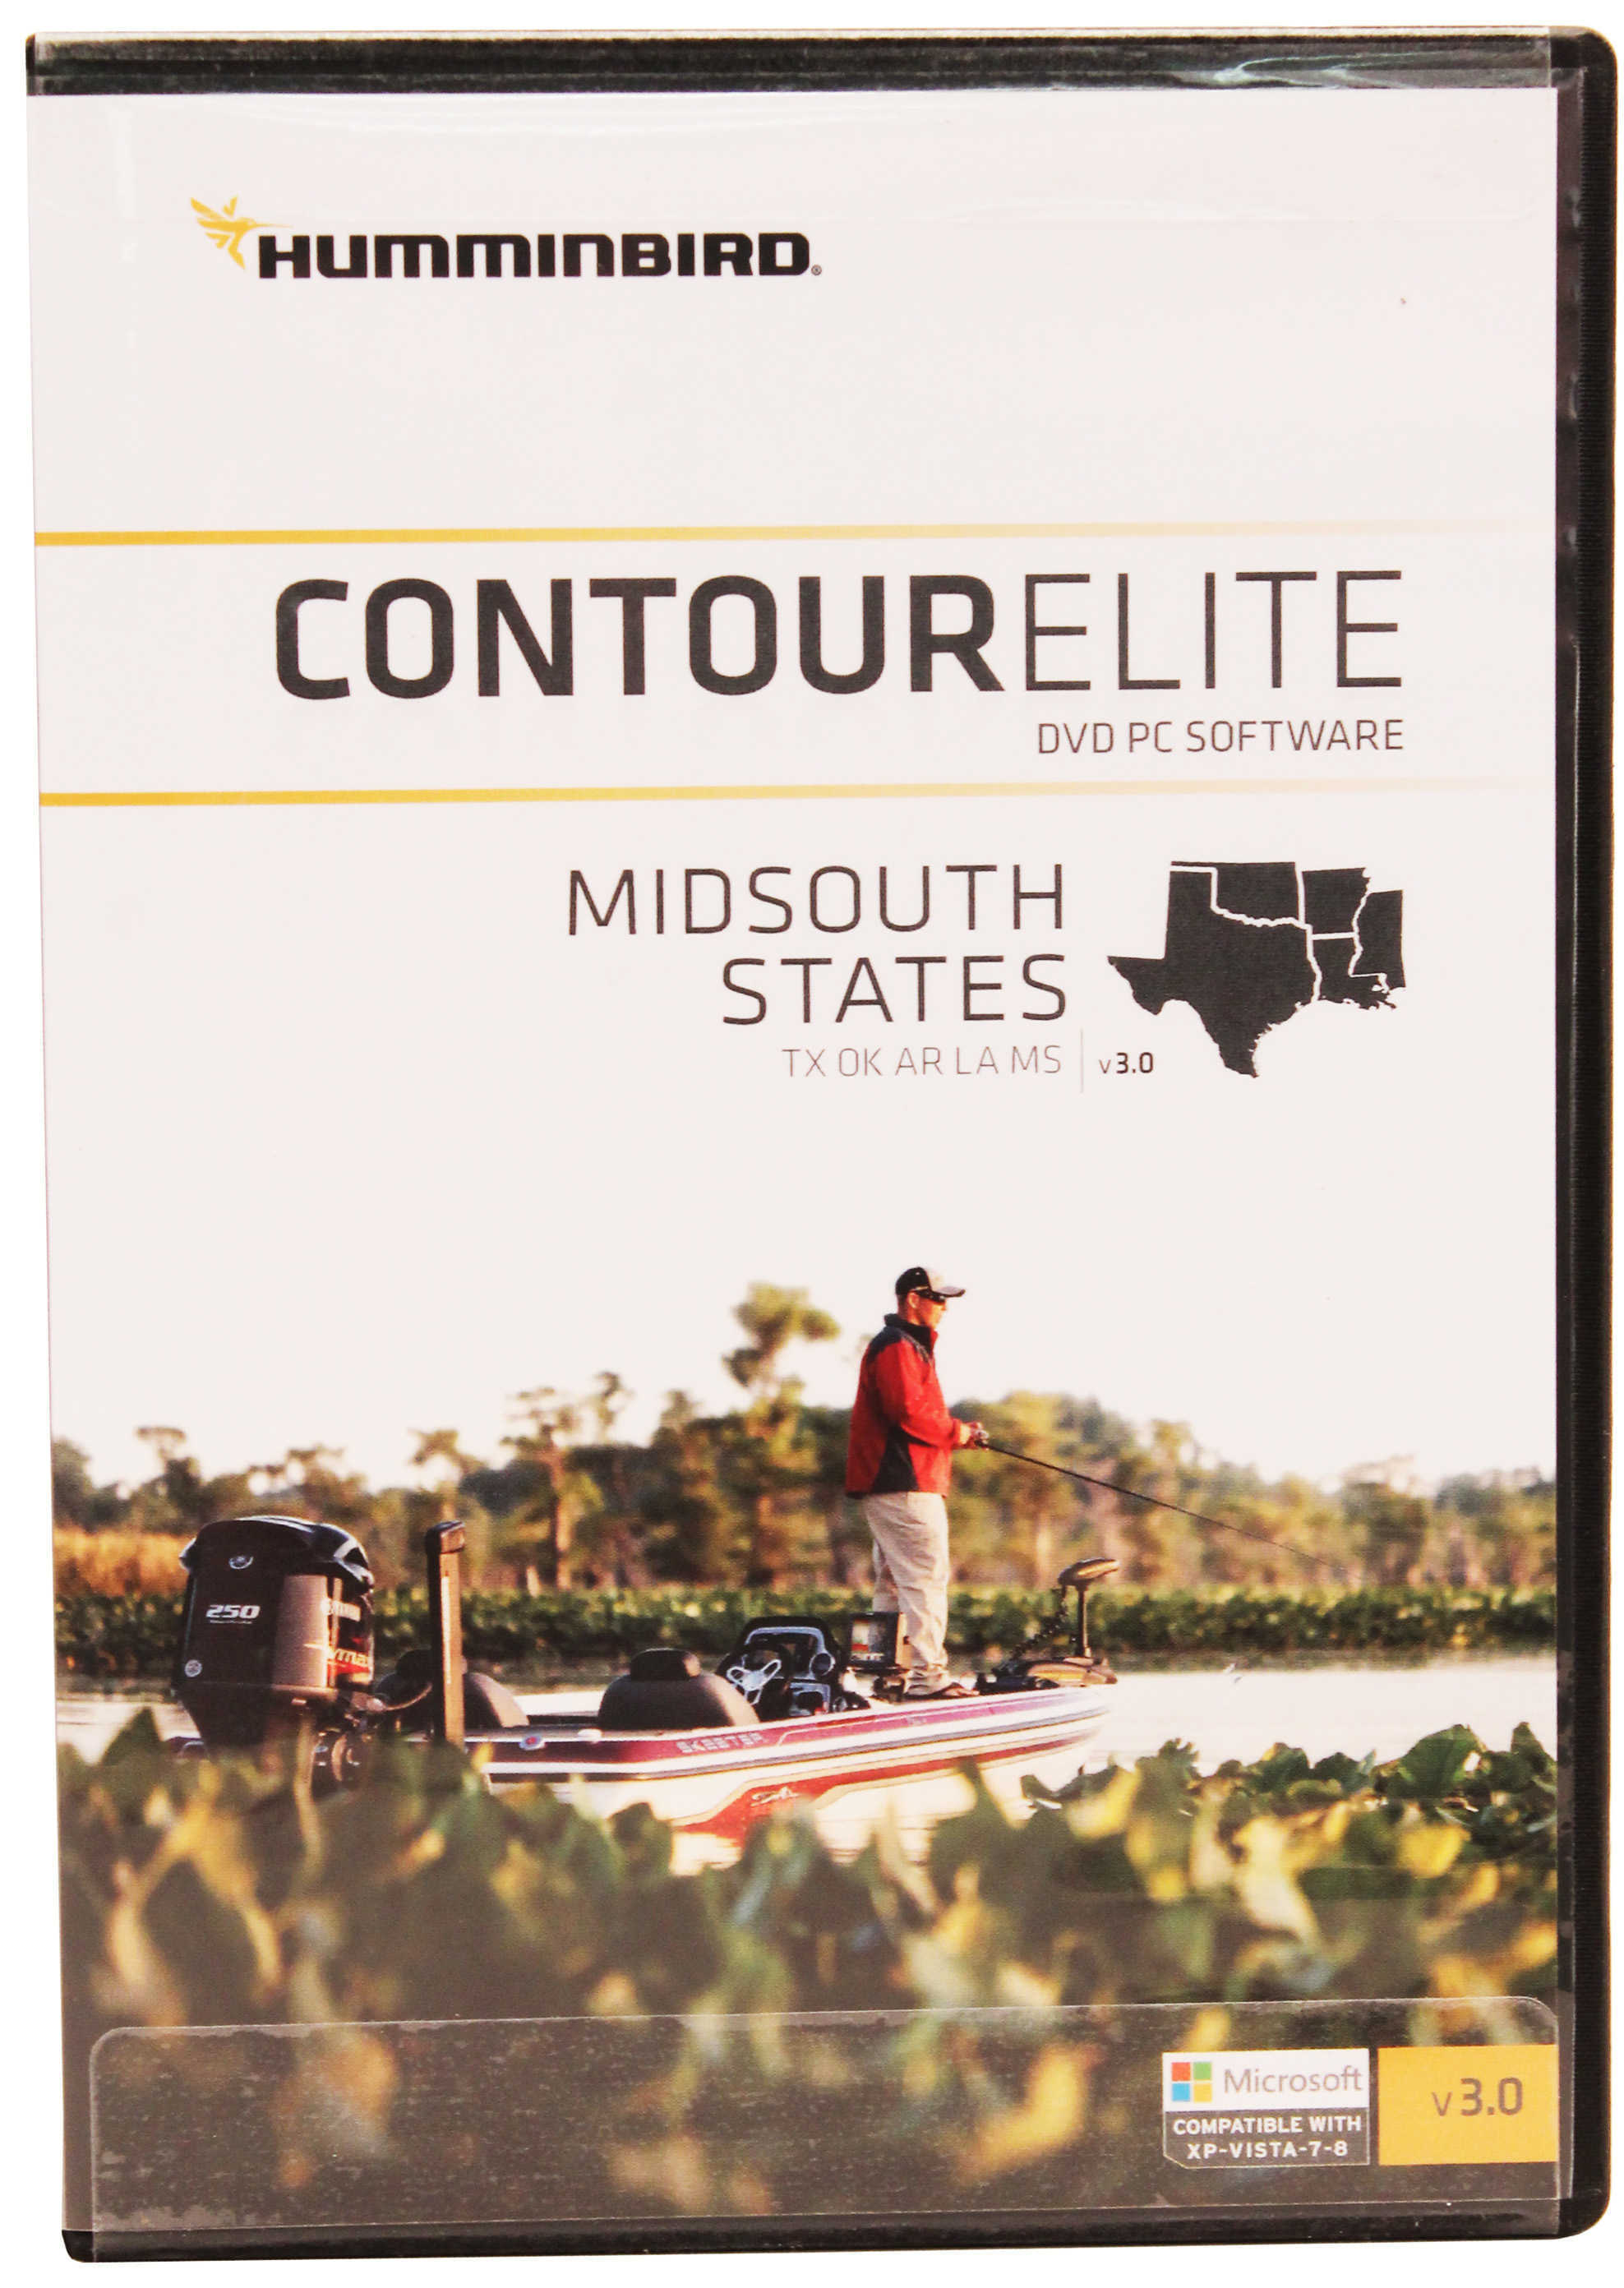 HUMMINBIRD Contour Elite Mid South States Software, 2016 Md: 600010-3